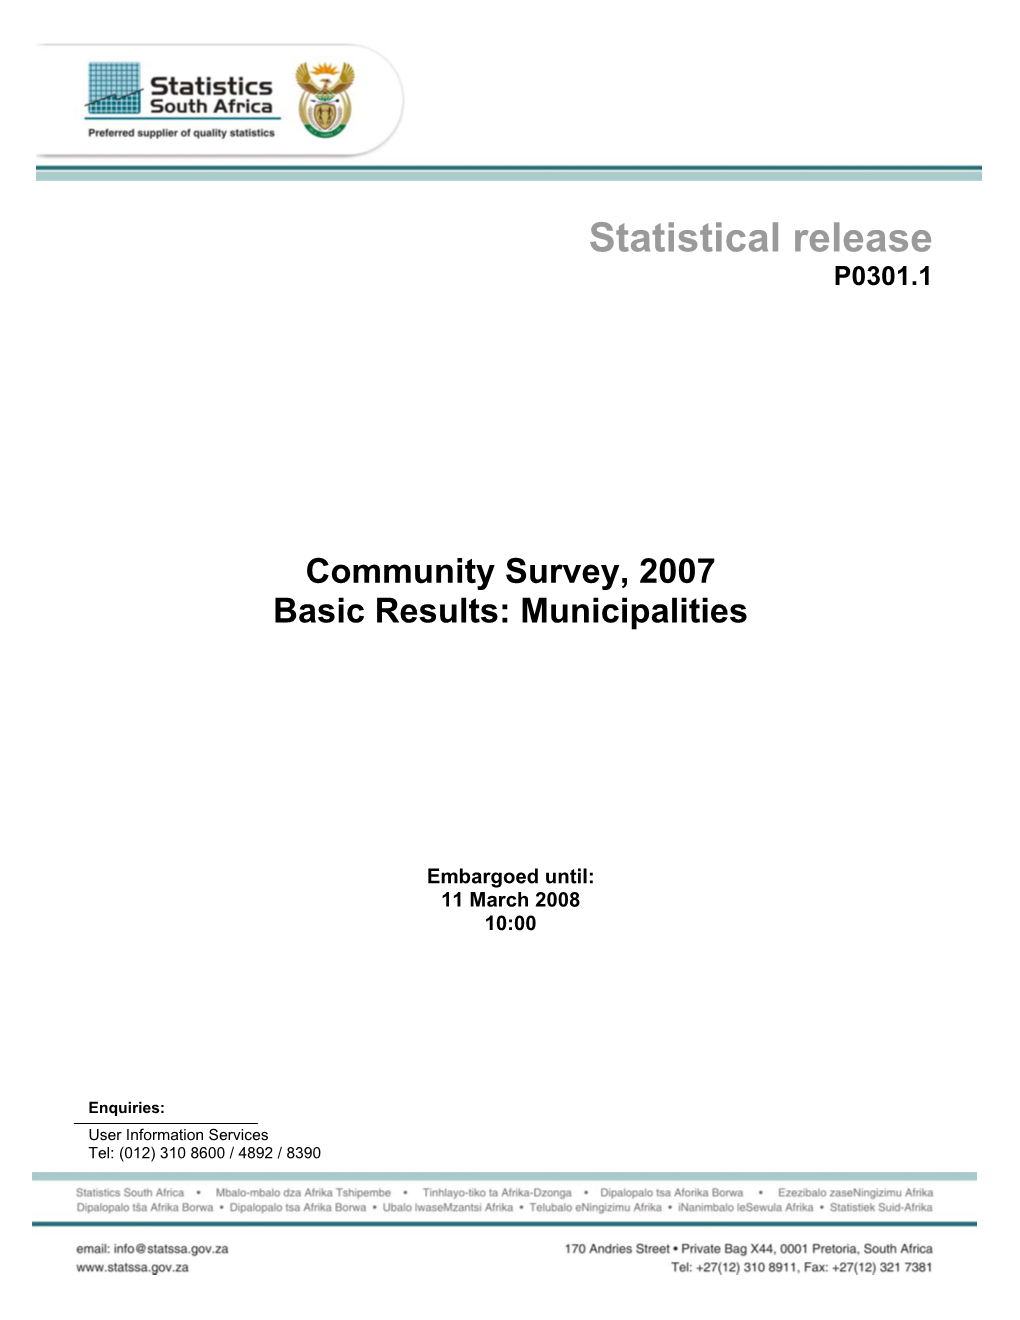 Statistical Release P0301.1